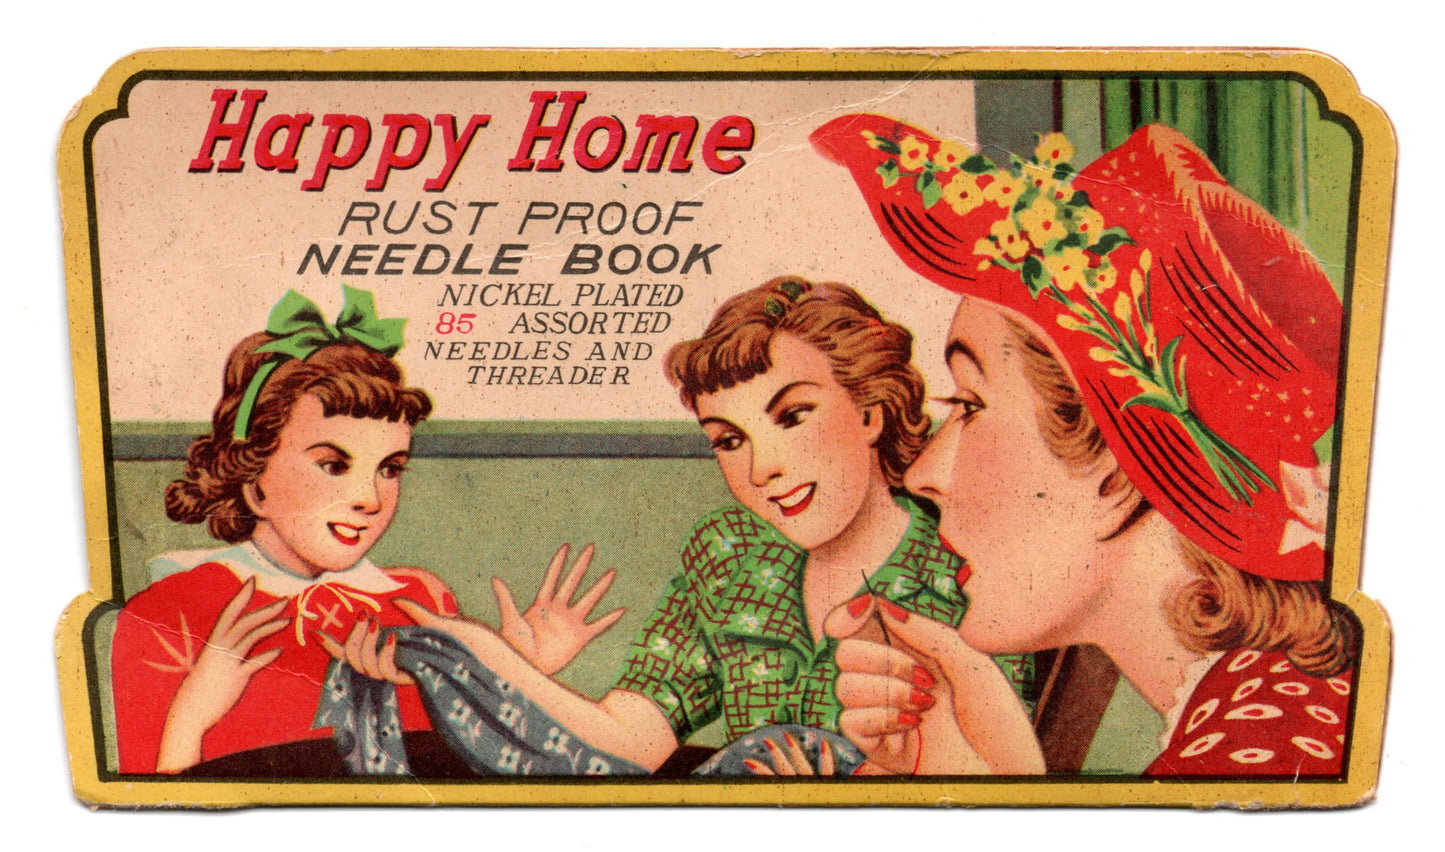 Happy Home Collectable 1950s Vintage Sewing Needle Book with Needles